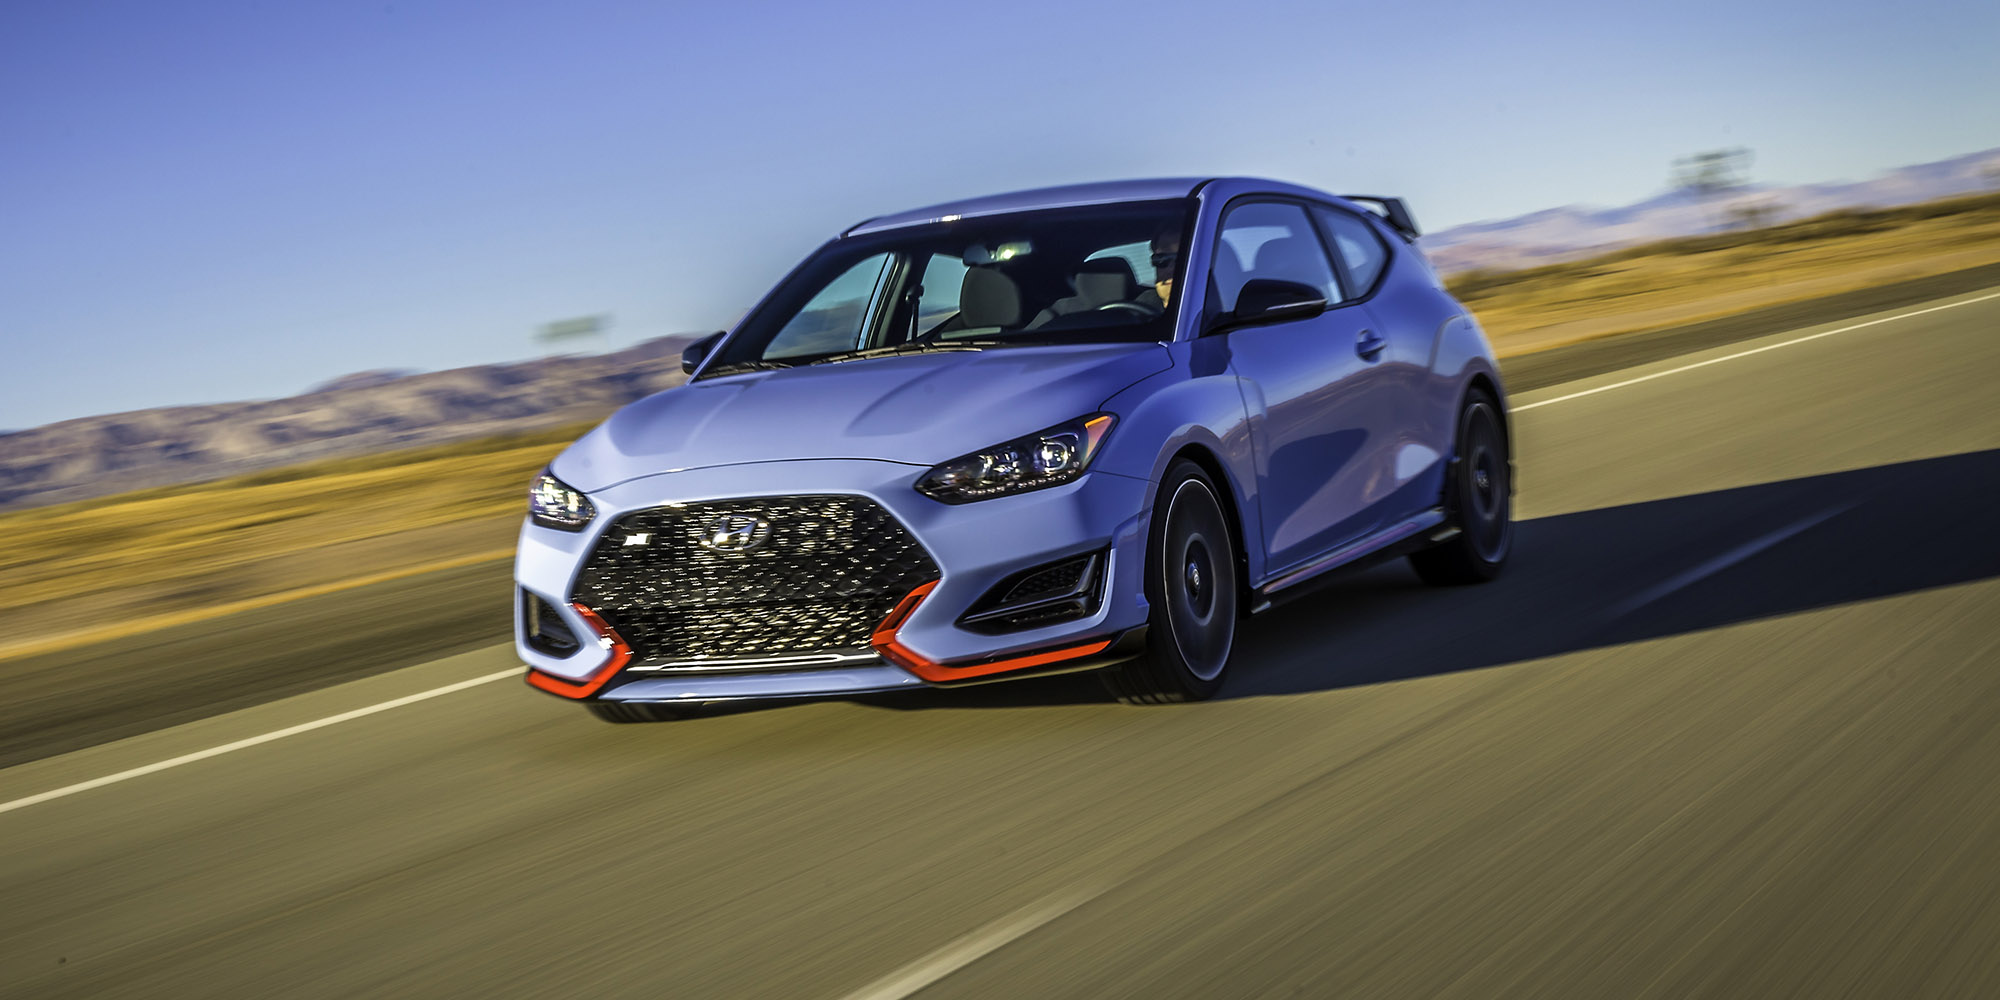 2018 Hyundai Veloster & Veloster N unveiled - Photos (1 of ...